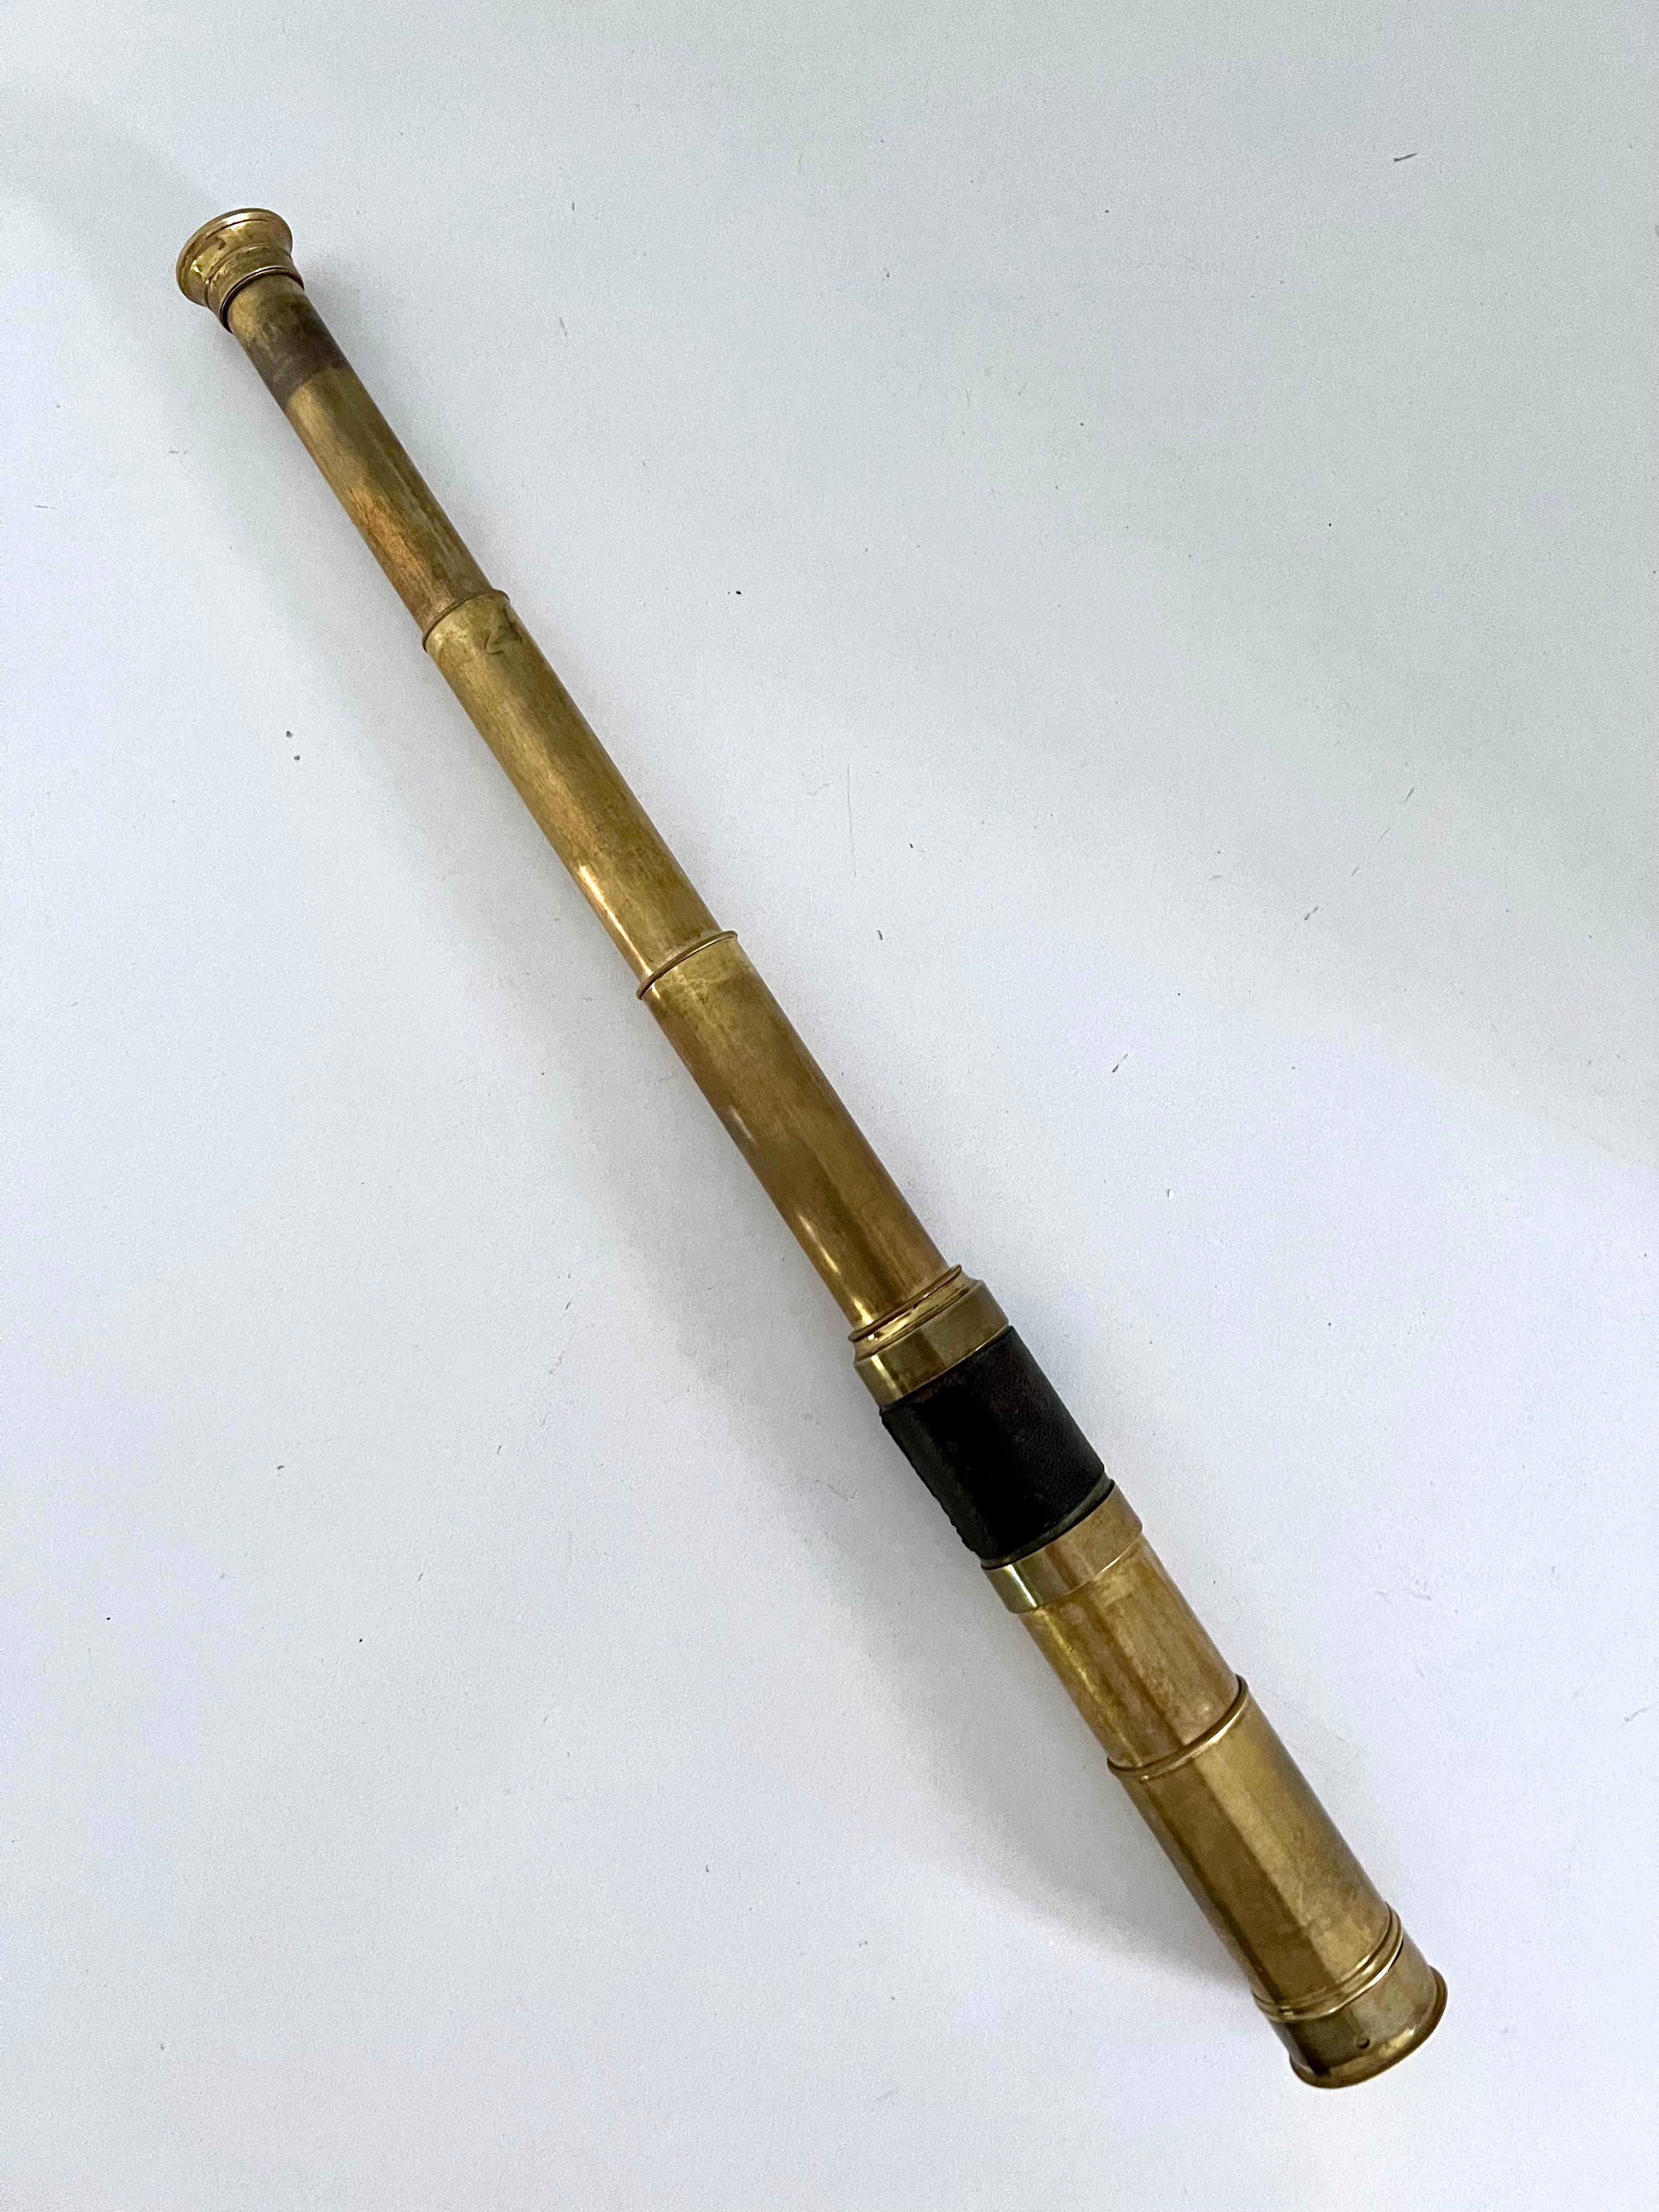 A wonderful retracting Spyglass or telescope with leather handle. The piece actually works very well, but is just as nice as a decorative piece. Beautifully crafted and with just the right amount of patination to look great in any setting - desk,